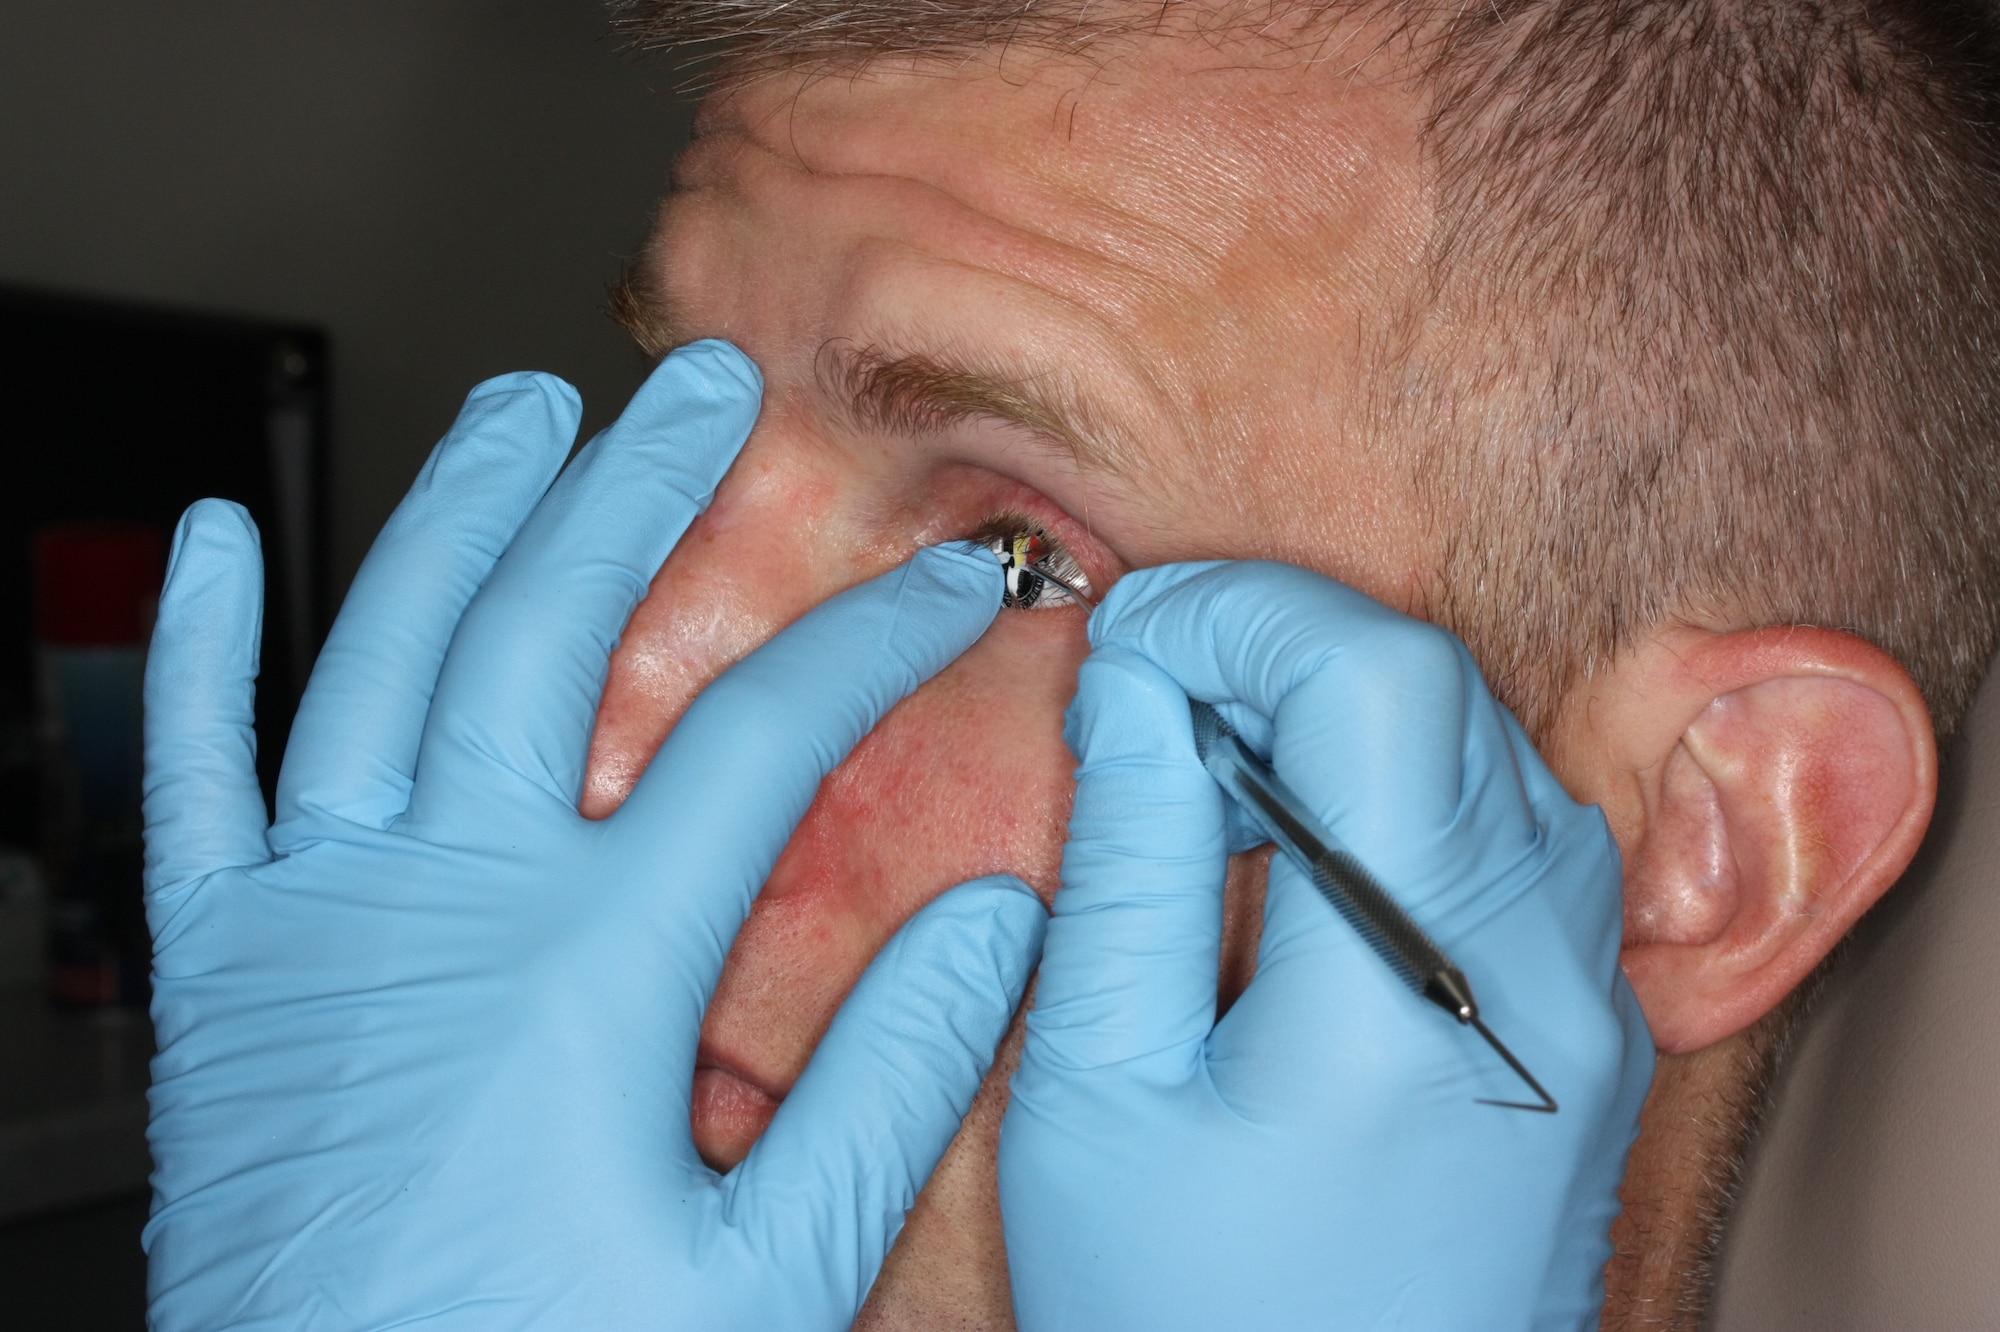 Lt. Col. Kenneth Dwyer, patient and Special Forces officer assigned to U.S. Army 1st Special Forces Command (Airborne), get his new prosthetic eye with his unit's crest checked at the Air Force Postgraduate Dental School on Joint Base San Antonio-Lackland, Texas, Nov. 17, 2016. Dwyer commands an elite unit of Army green berets and rangers at Fort Bragg, North Carolina. (Courtesy photo) 